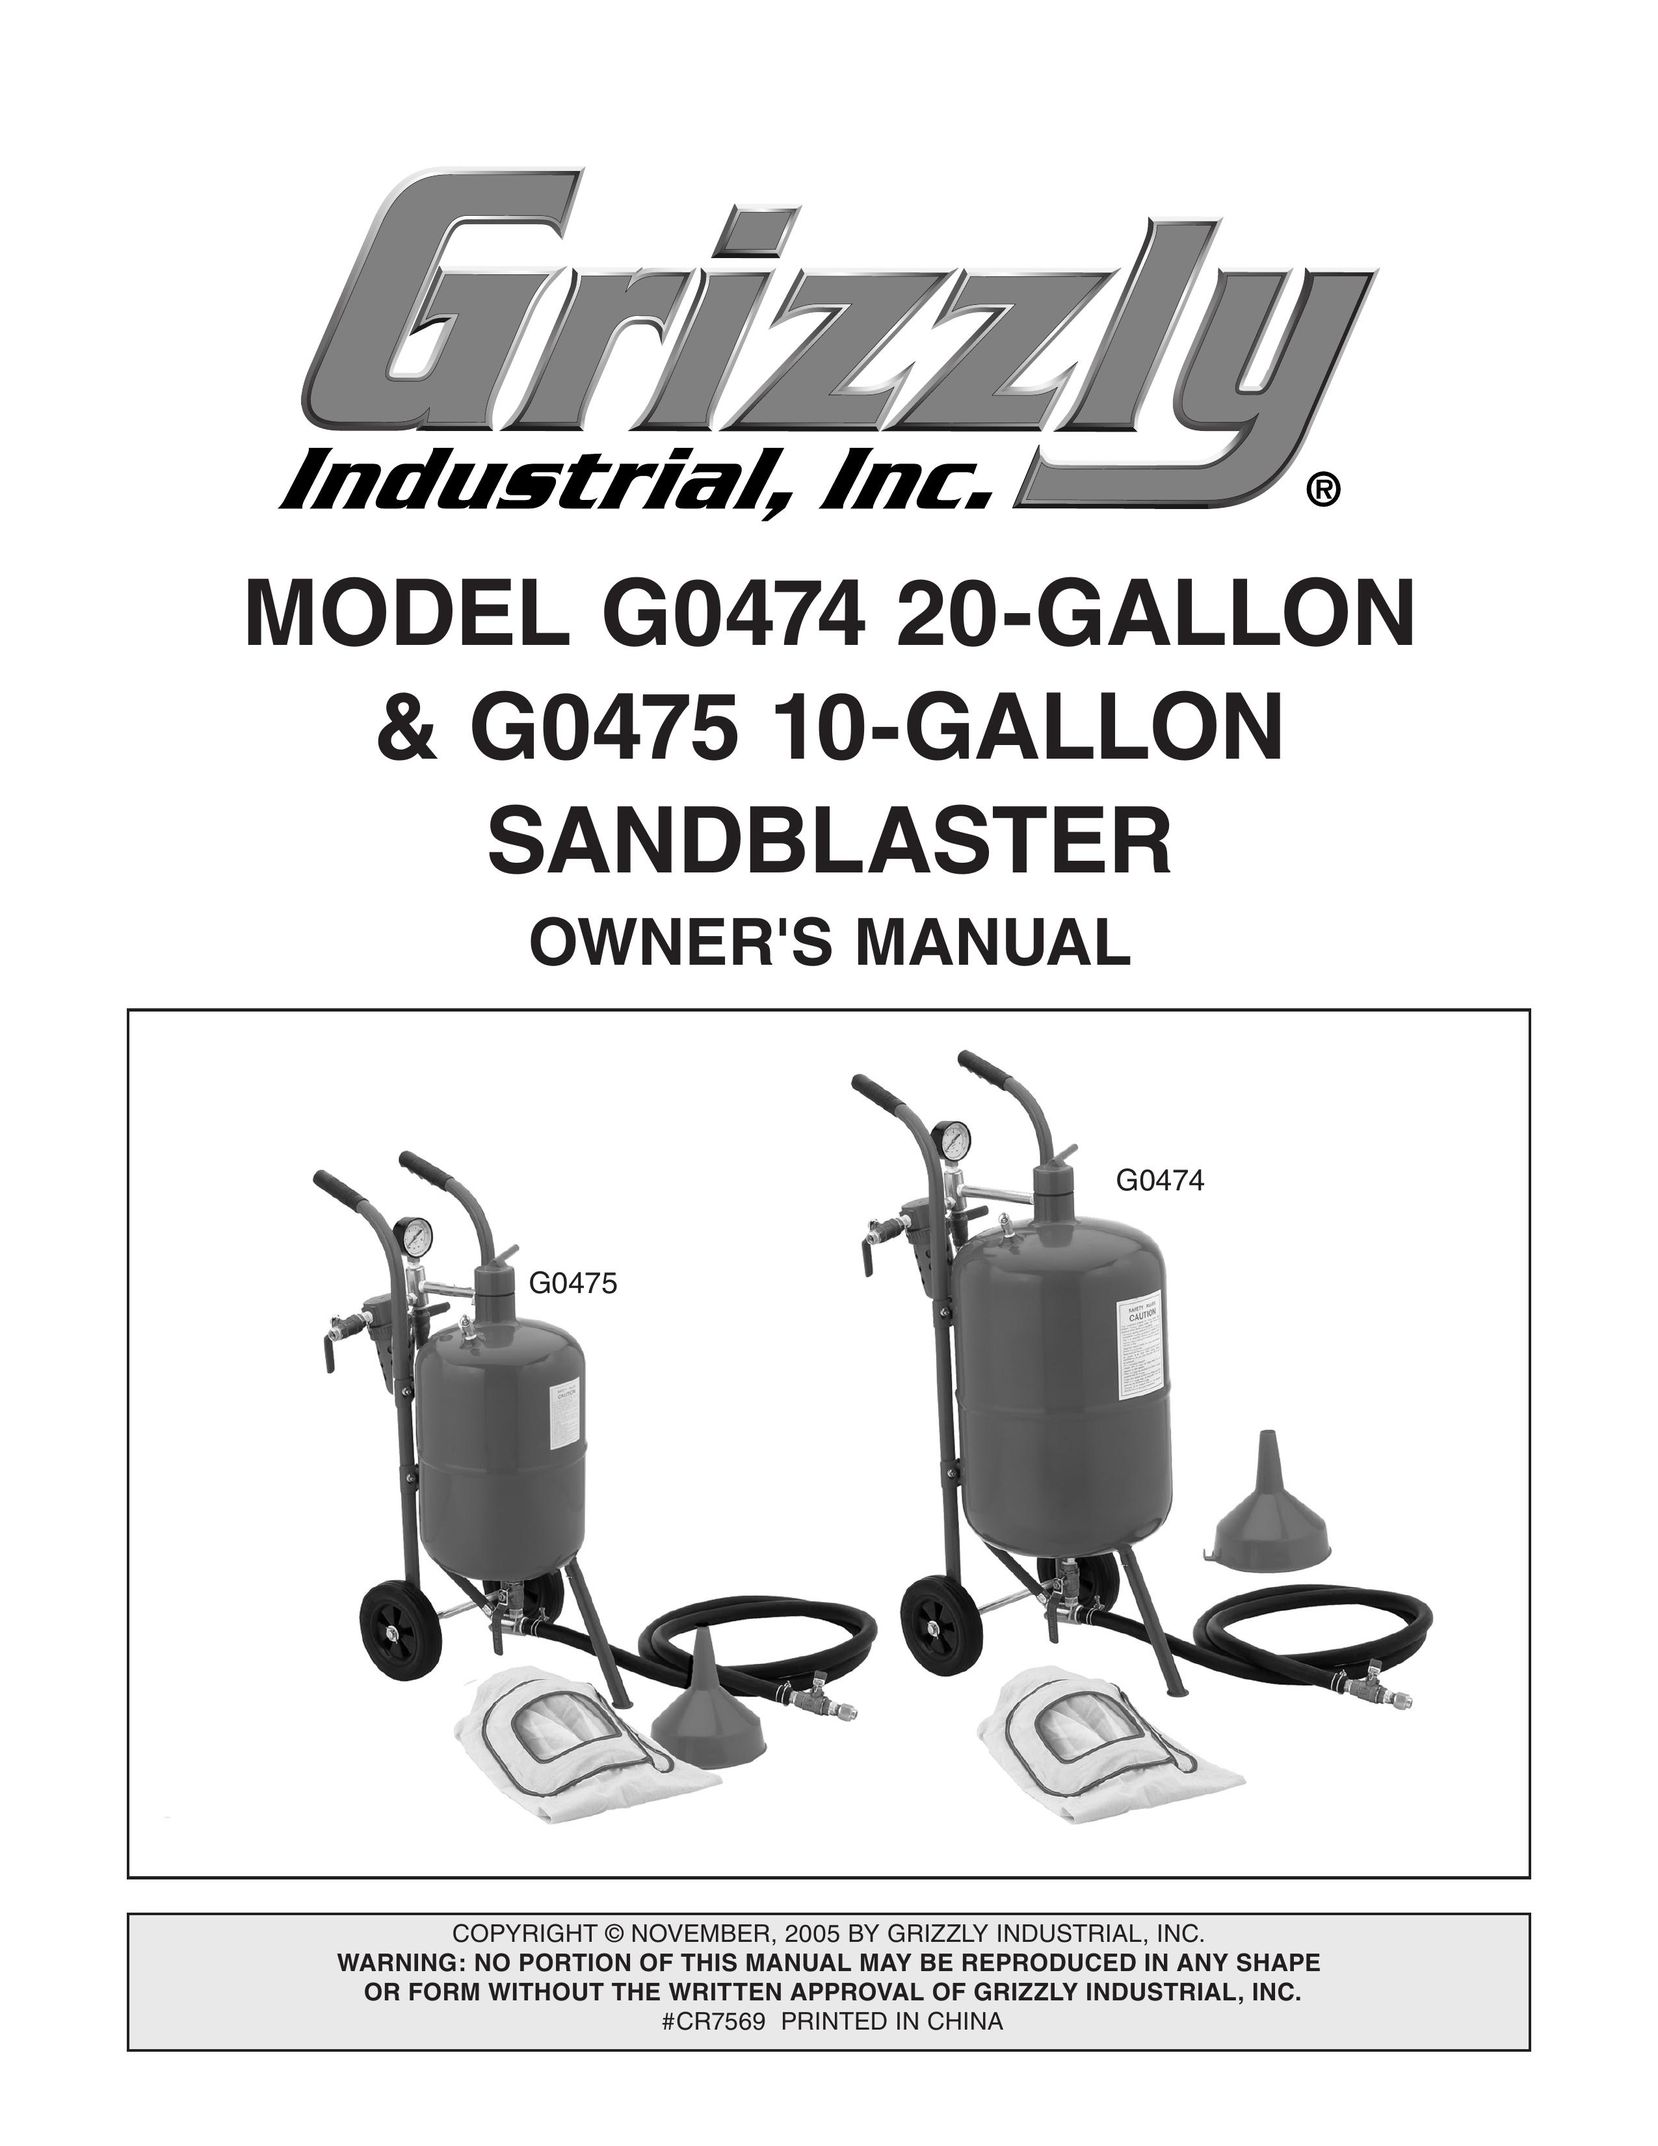 Grizzly G0475 Sander User Manual